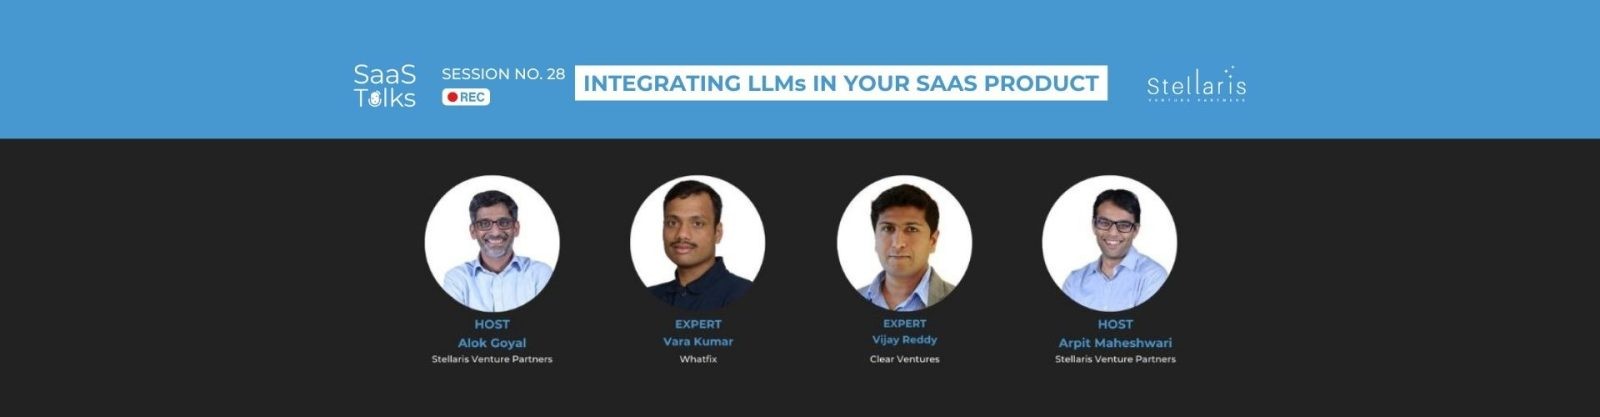 SaaS Talks #28: Integrating LLMs in your SaaS product